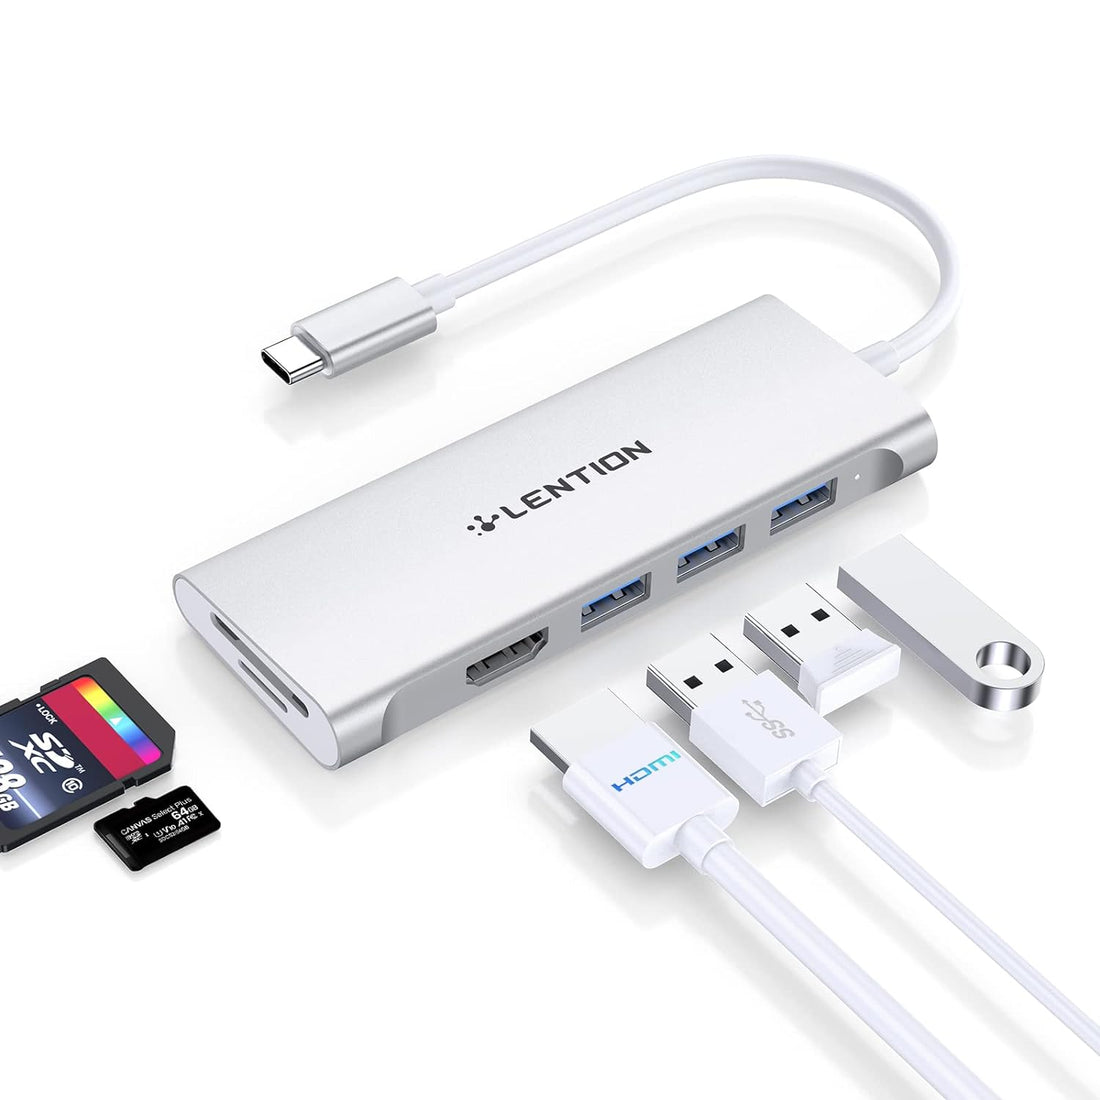 LENTION USB C Hub with 4K HDMI, 3 USB 3.0, SD 3.0 Card Reader Compatible 2020-2016 MacBook Pro 13/15/16, New iPad Pro/Mac Air/Surface, Chromebook, More, Multi-Port Dongle Adapter (CB-C34, Silver)